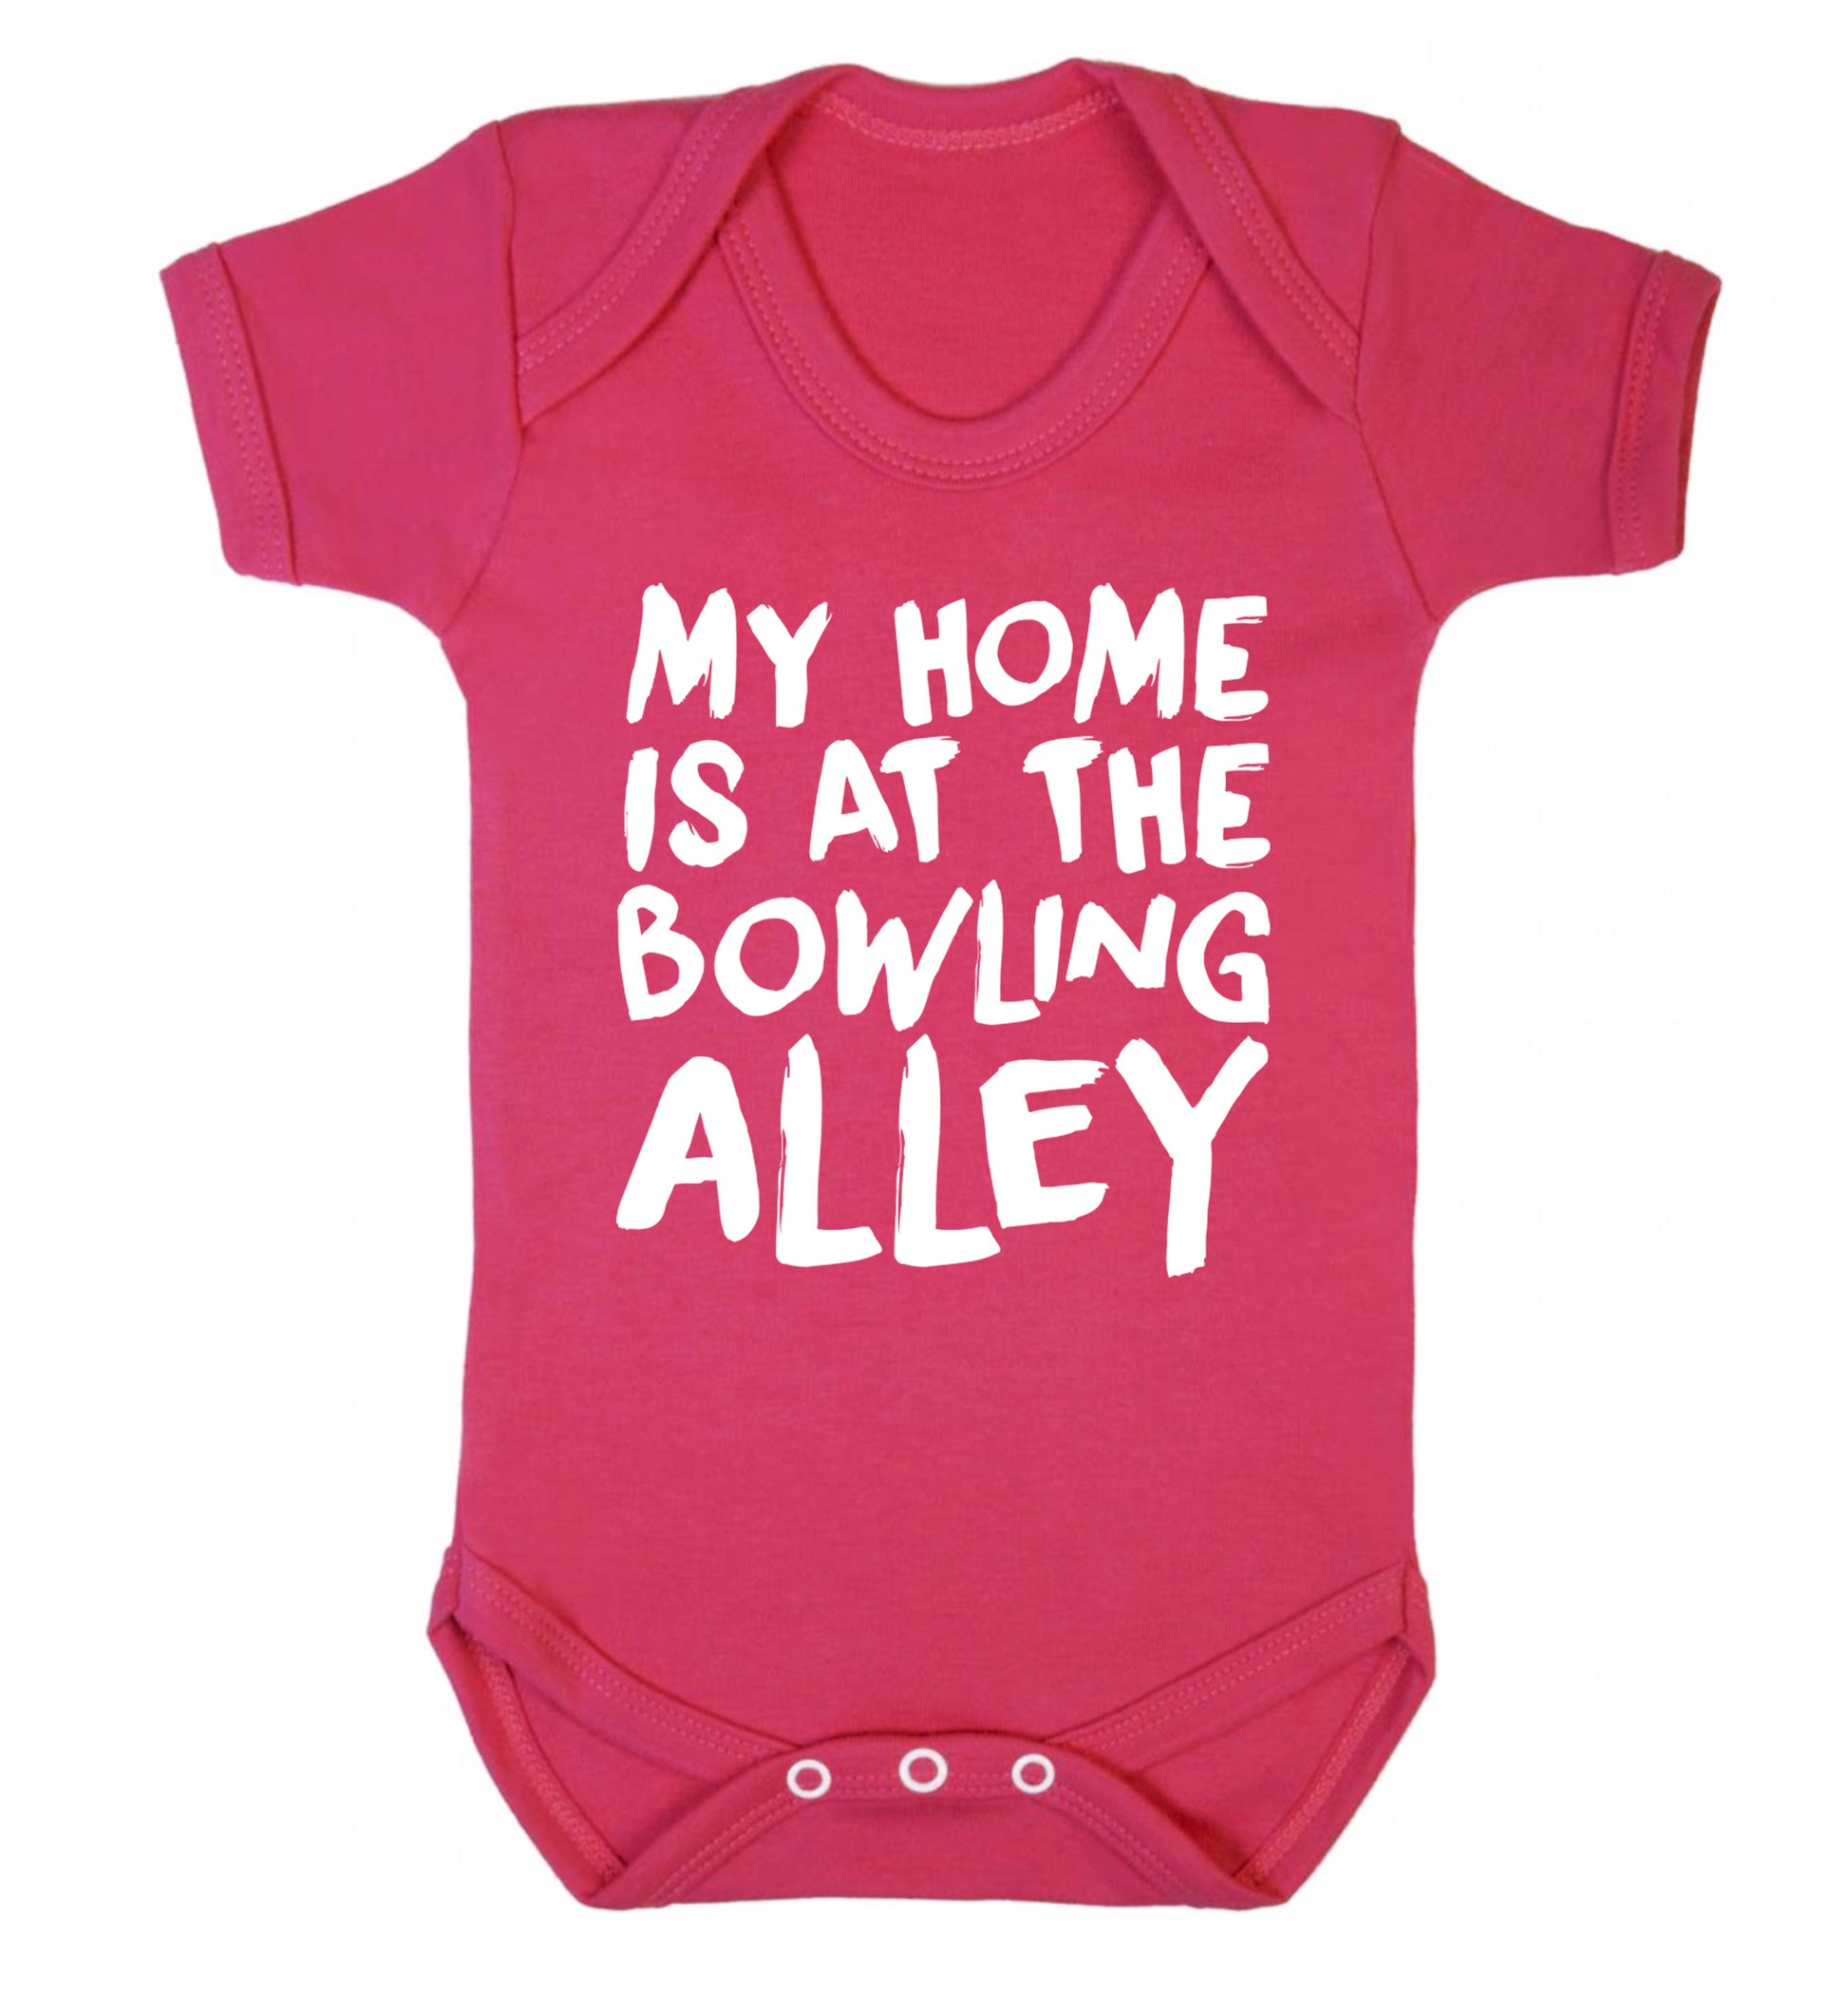 My home is at the bowling alley Baby Vest dark pink 18-24 months